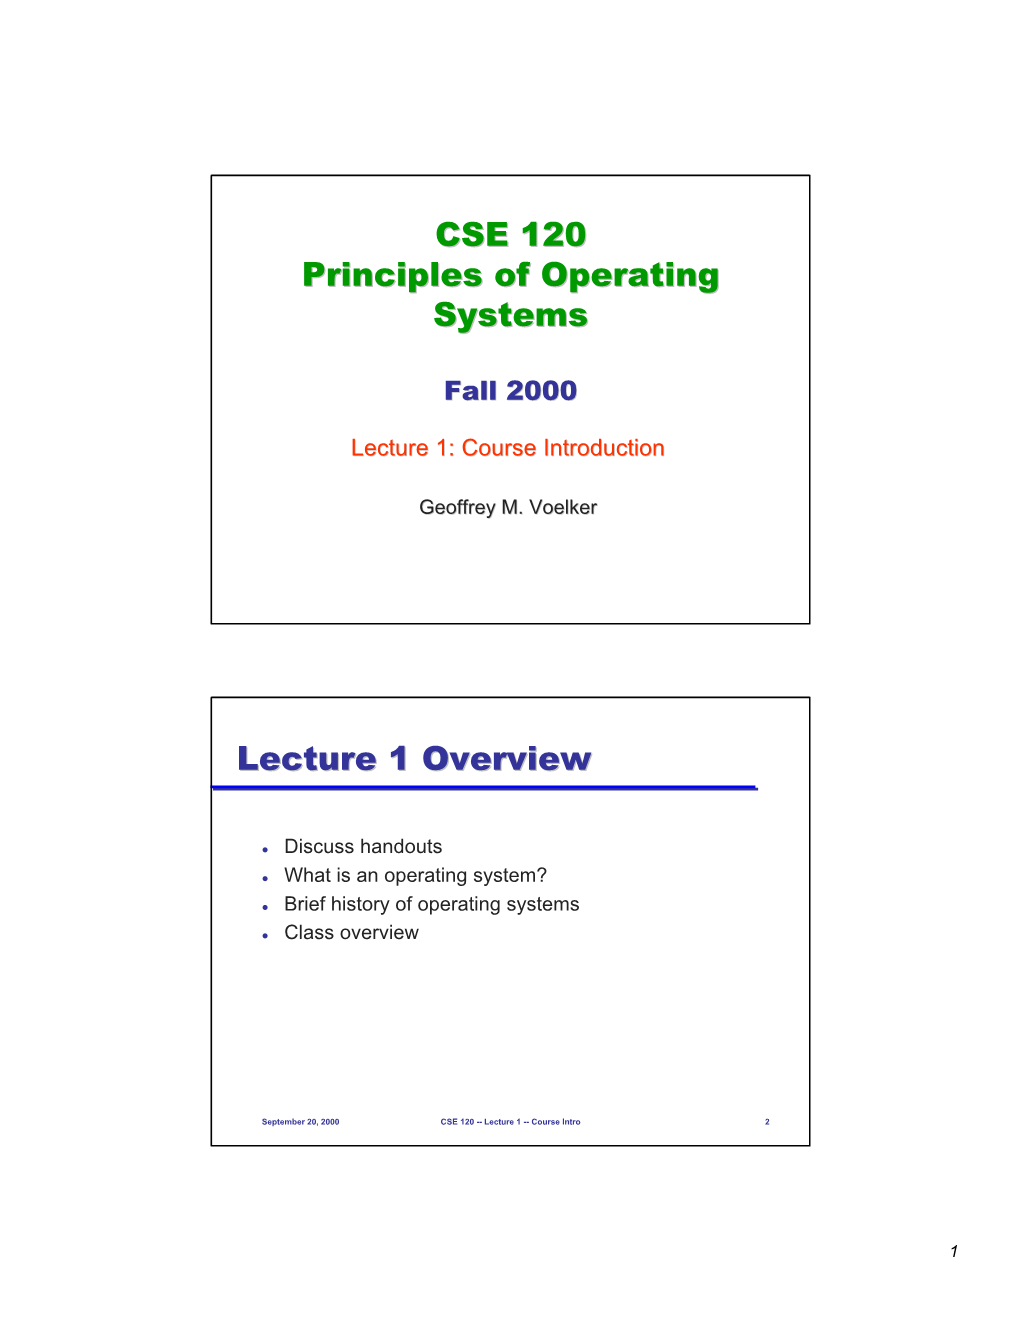 CSE 120 Principles of Operating Systems Lecture 1 Overview